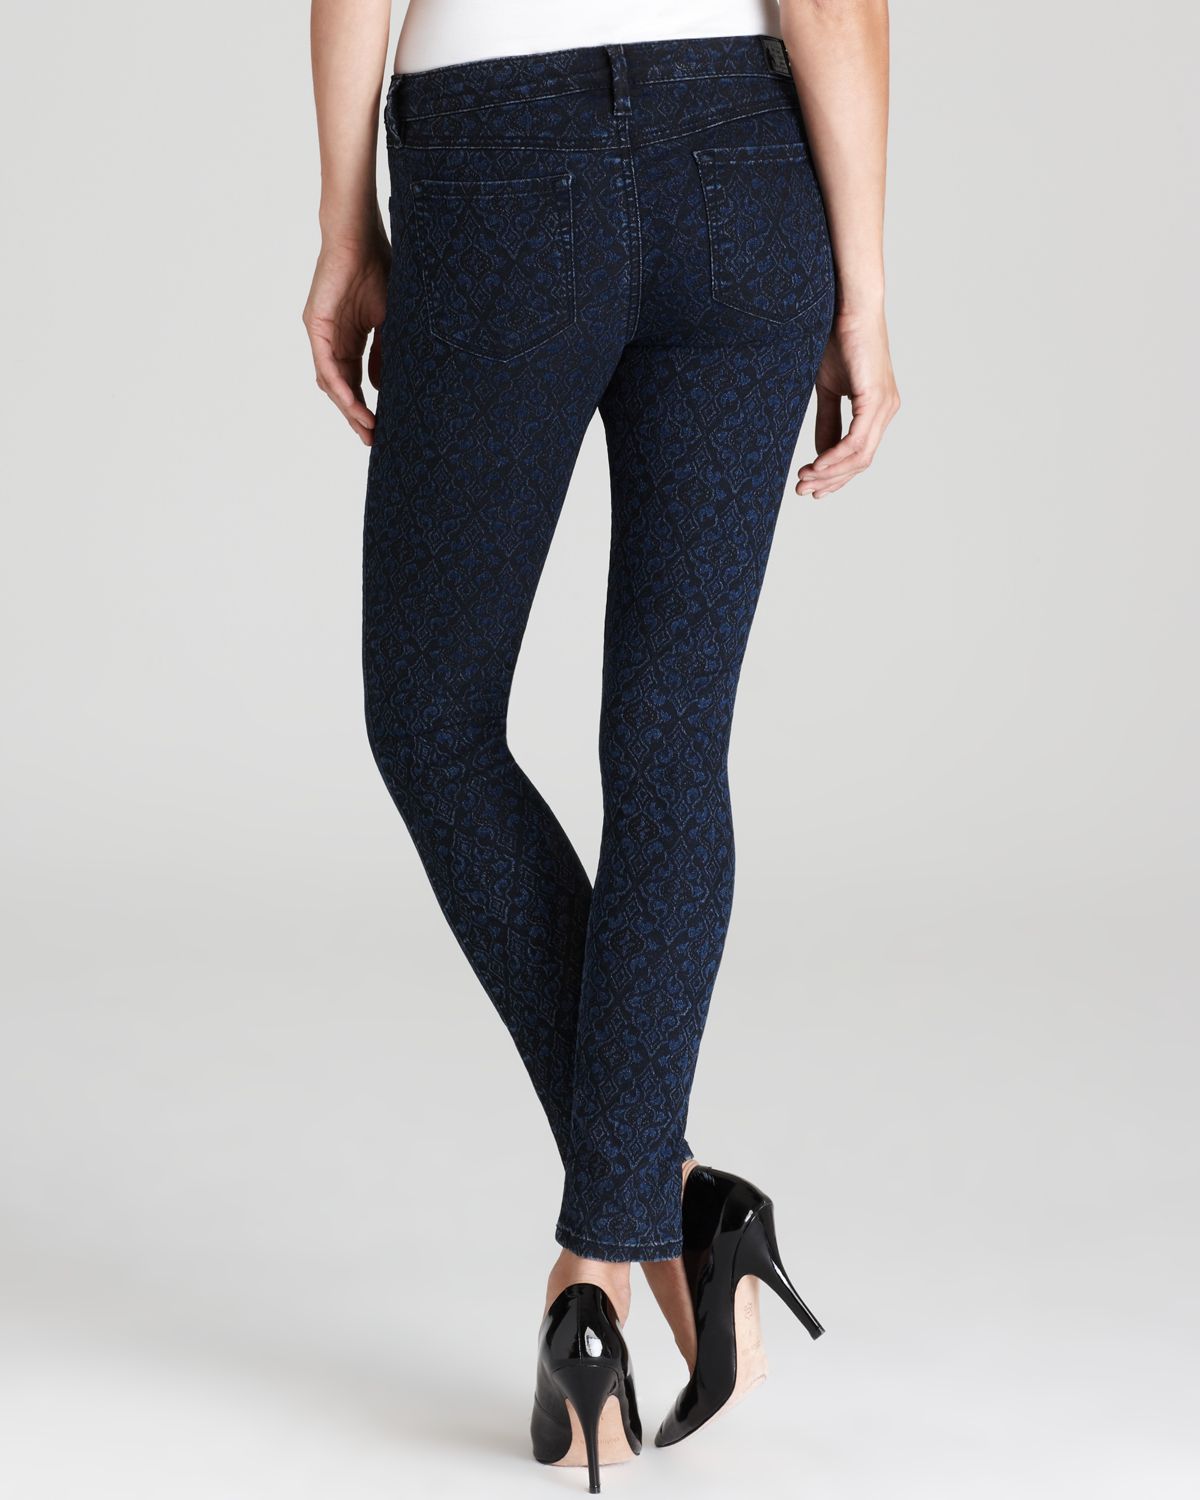 guess leggings jeans, OFF 73%,Free Shipping,